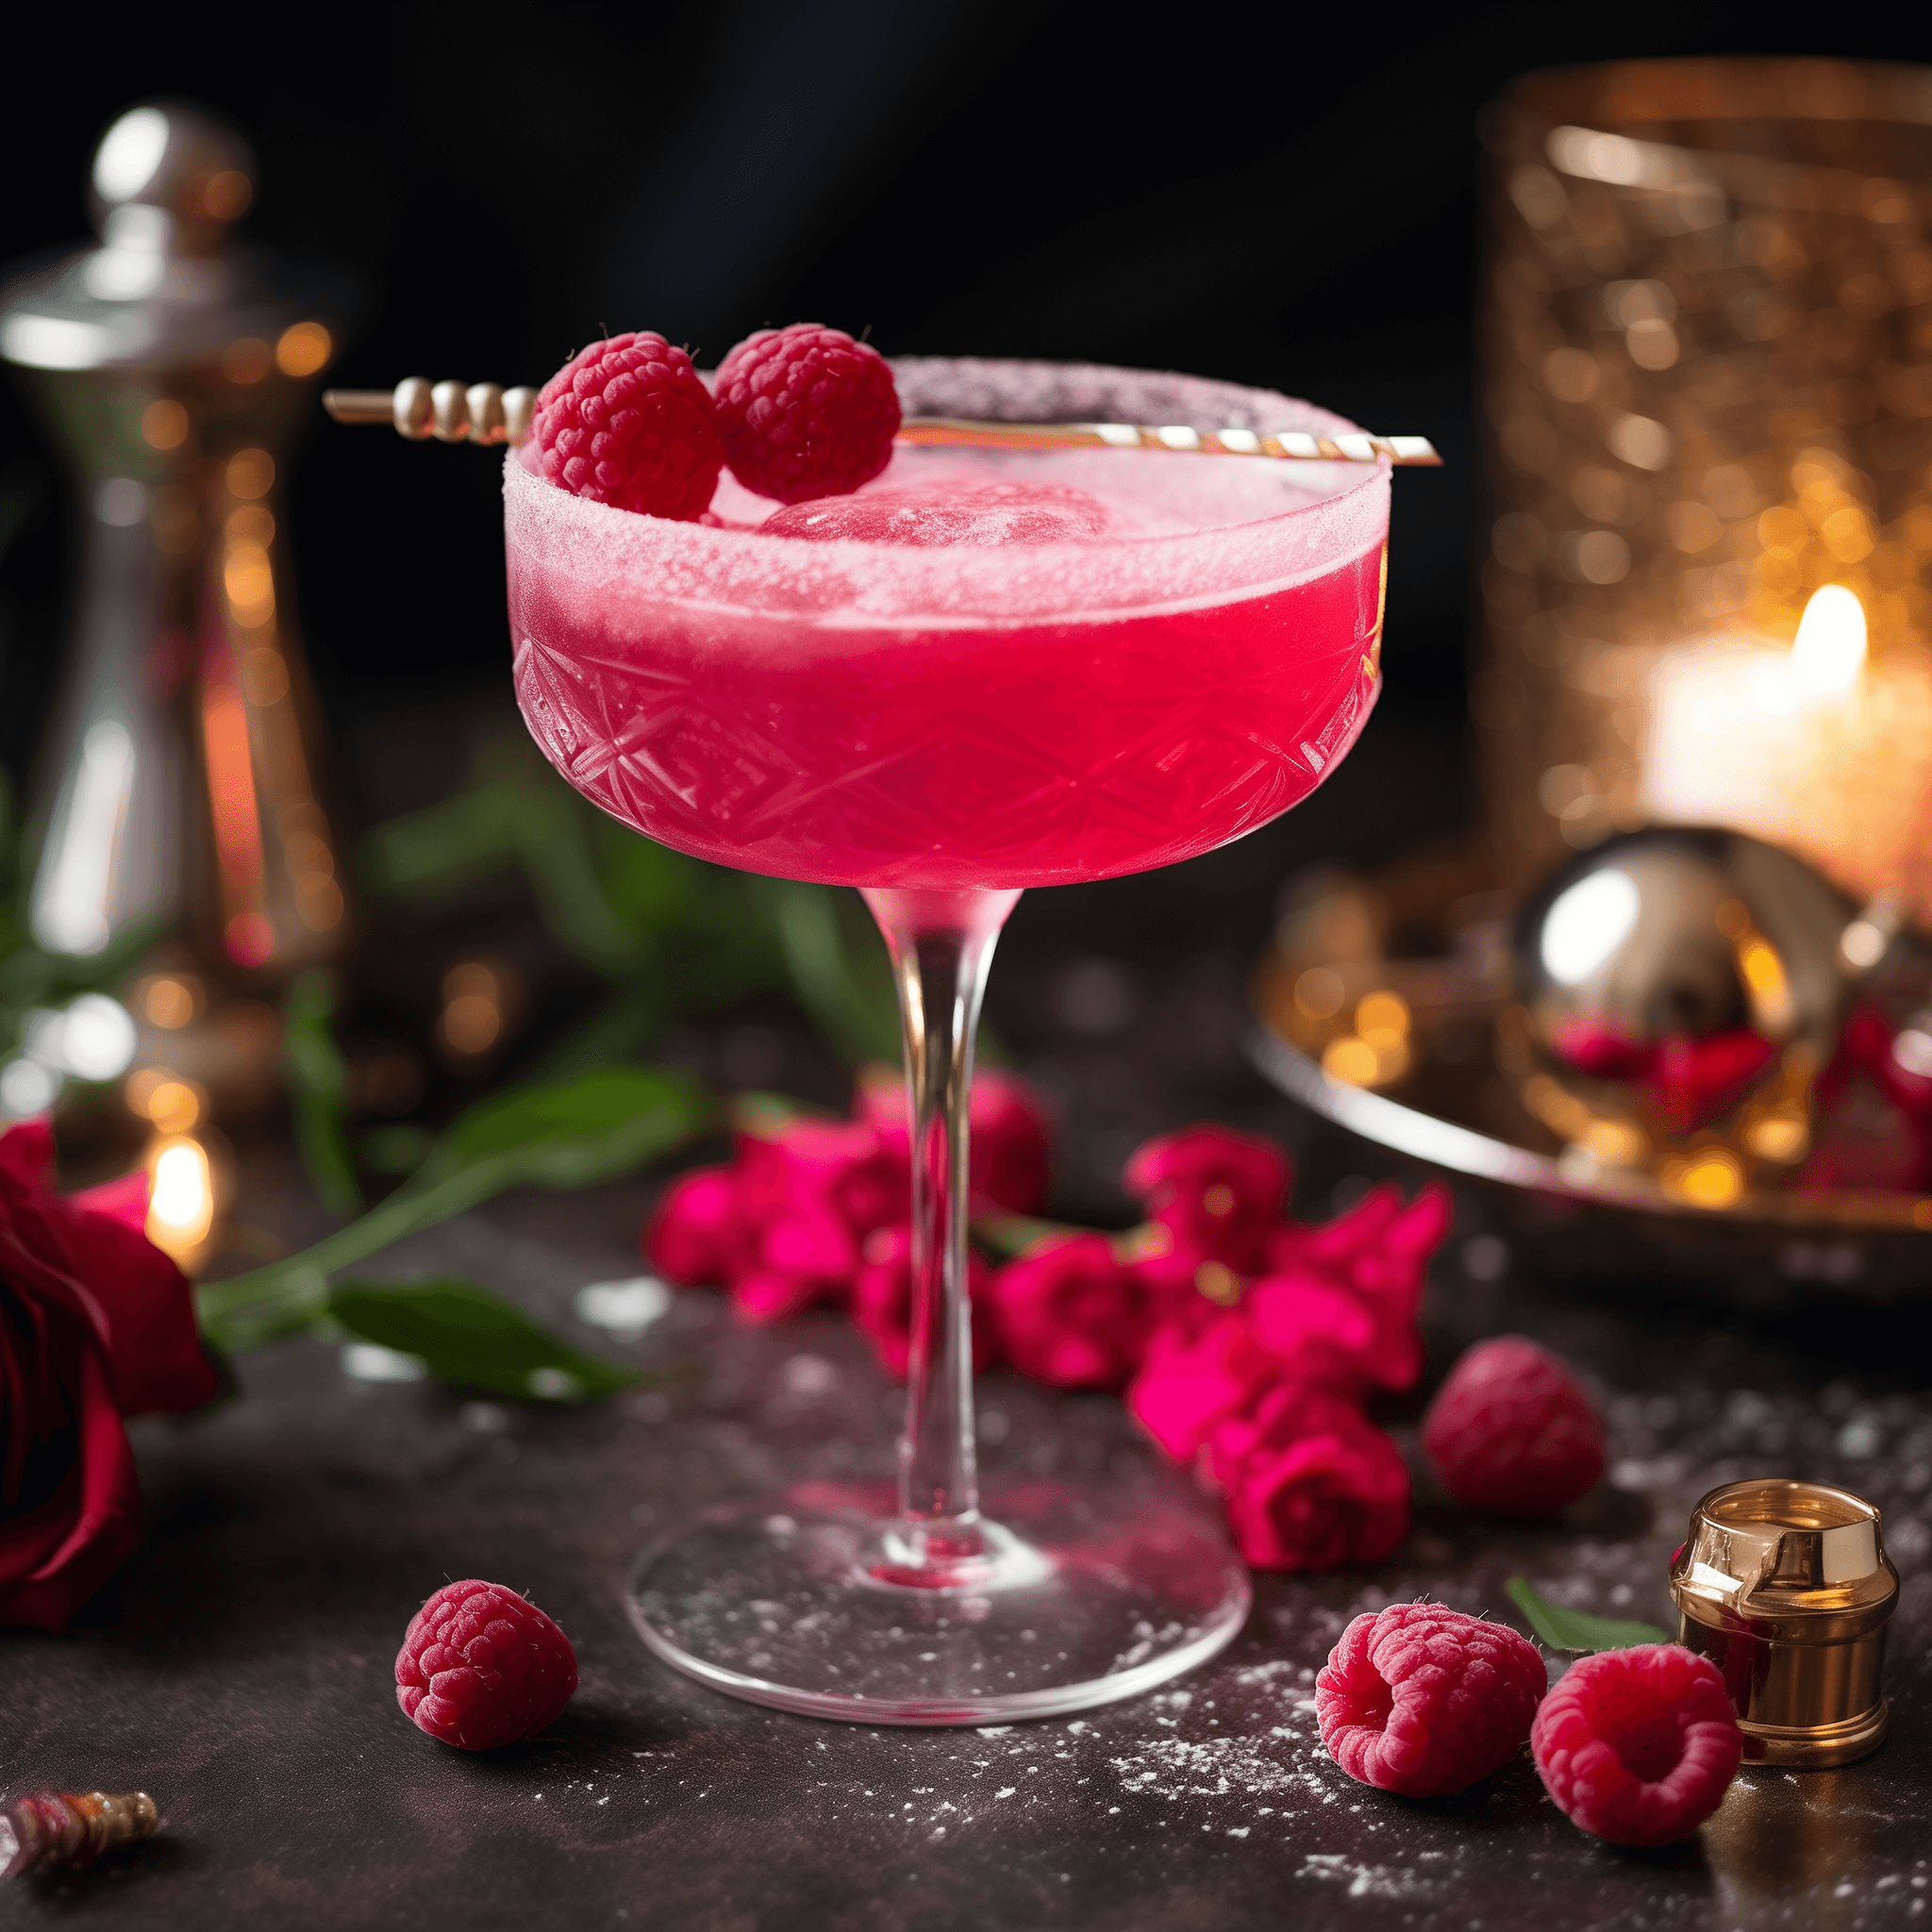 Fairy Belle Cocktail Recipe - The Fairy Belle cocktail is a harmonious blend of sweet, sour, and fruity flavors. The delicate balance of tartness from the lemon juice, sweetness from the elderflower liqueur, and the fruity notes from the raspberry syrup create a refreshing and enchanting taste. The gin adds a subtle herbal undertone, while the egg white gives the cocktail a smooth and velvety texture.